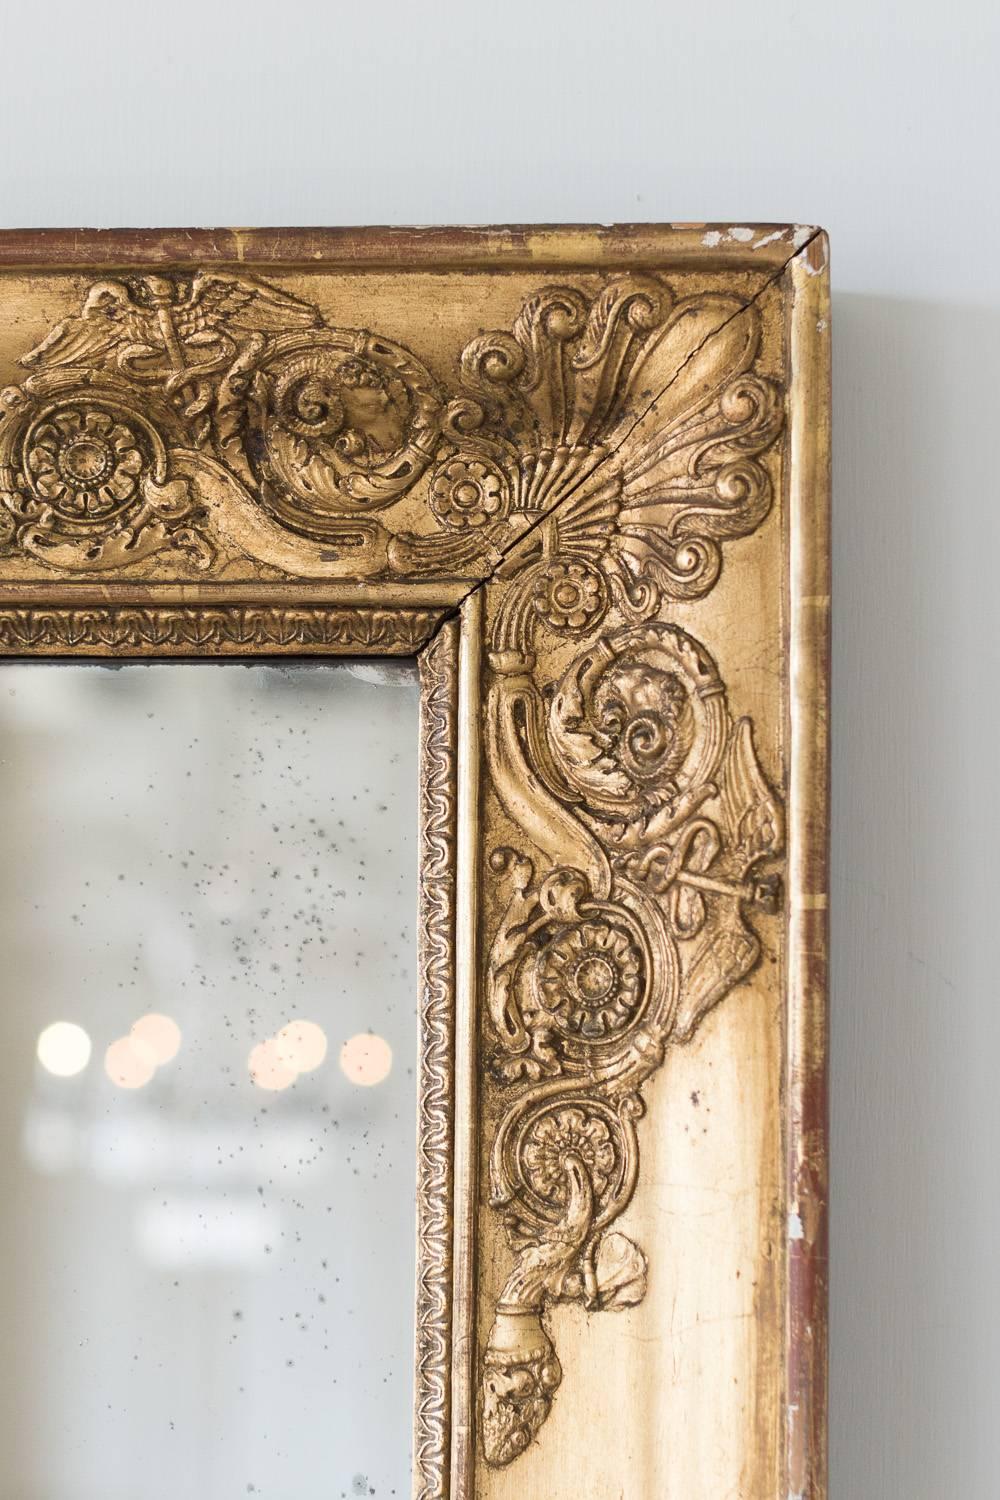 Gorgeous, wide- framed antique mirror with large medallion themed flowers. Rams, fireflies and more emanate from the frame. The design details are quite unique and add beautiful depth to this piece. Some distressing on the original glass. Stunning